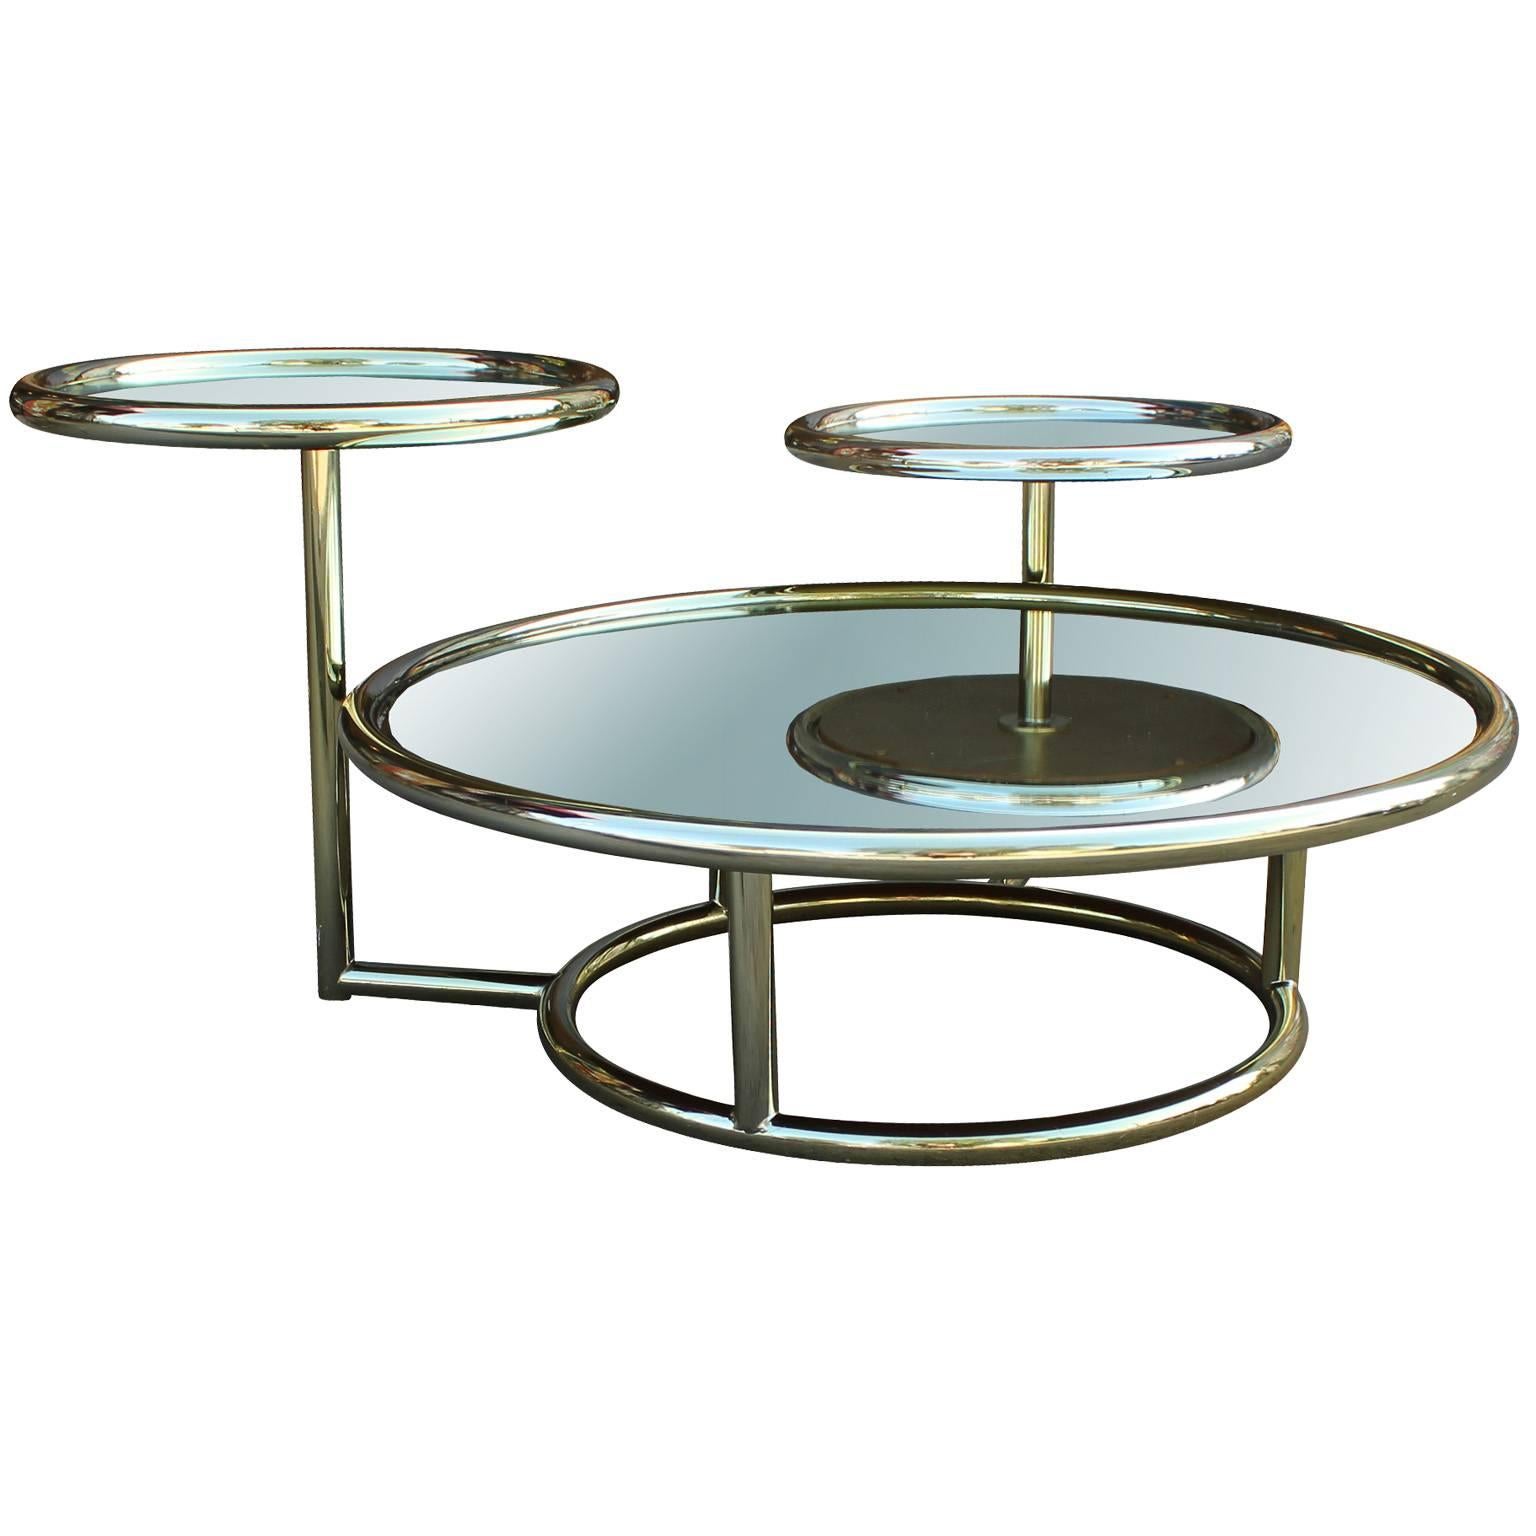 Striking multilevel brass and mirror coffee table. Shiny brass tubes are in great vintage condition. Coffee table measure 10.25 in. tall, while the smaller circles meausre 15.75 in. and 18.75 in. tall. Striking piece with playful lines.